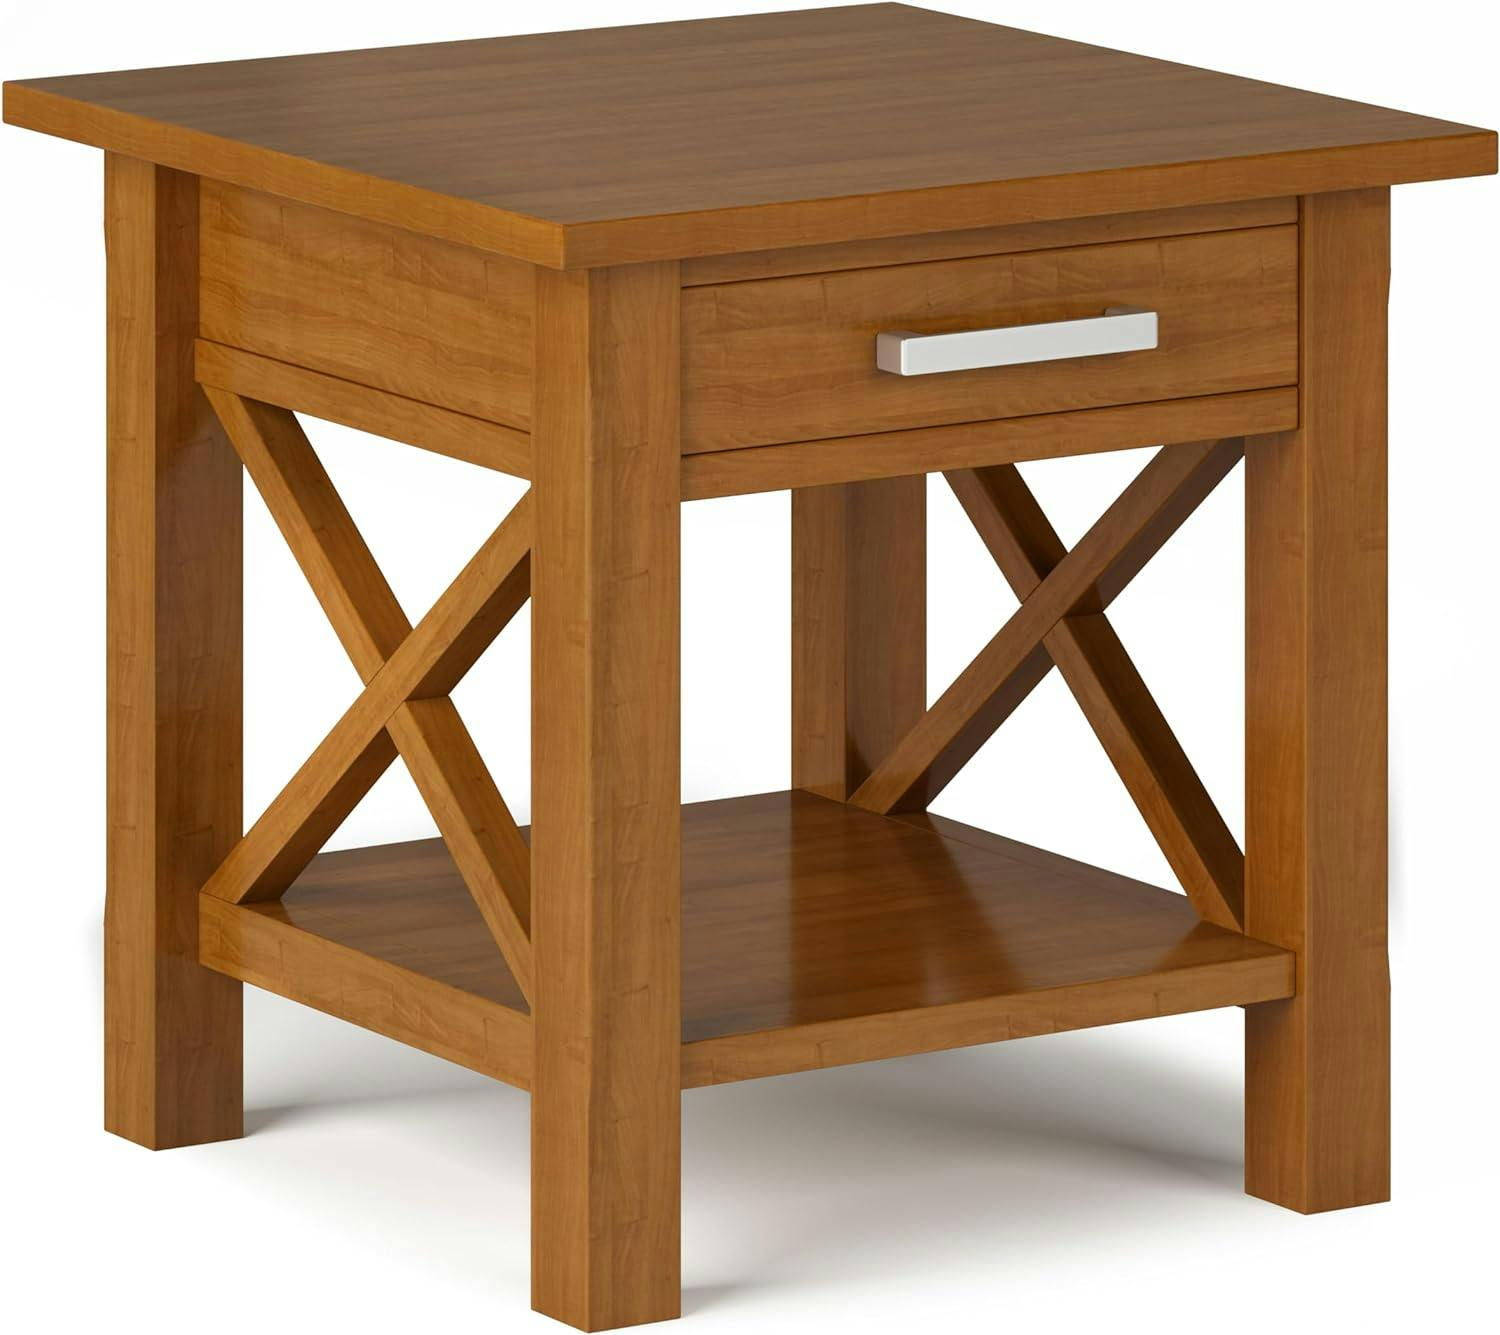 Kitchener Light Golden Brown Solid Wood Square End Table with Storage